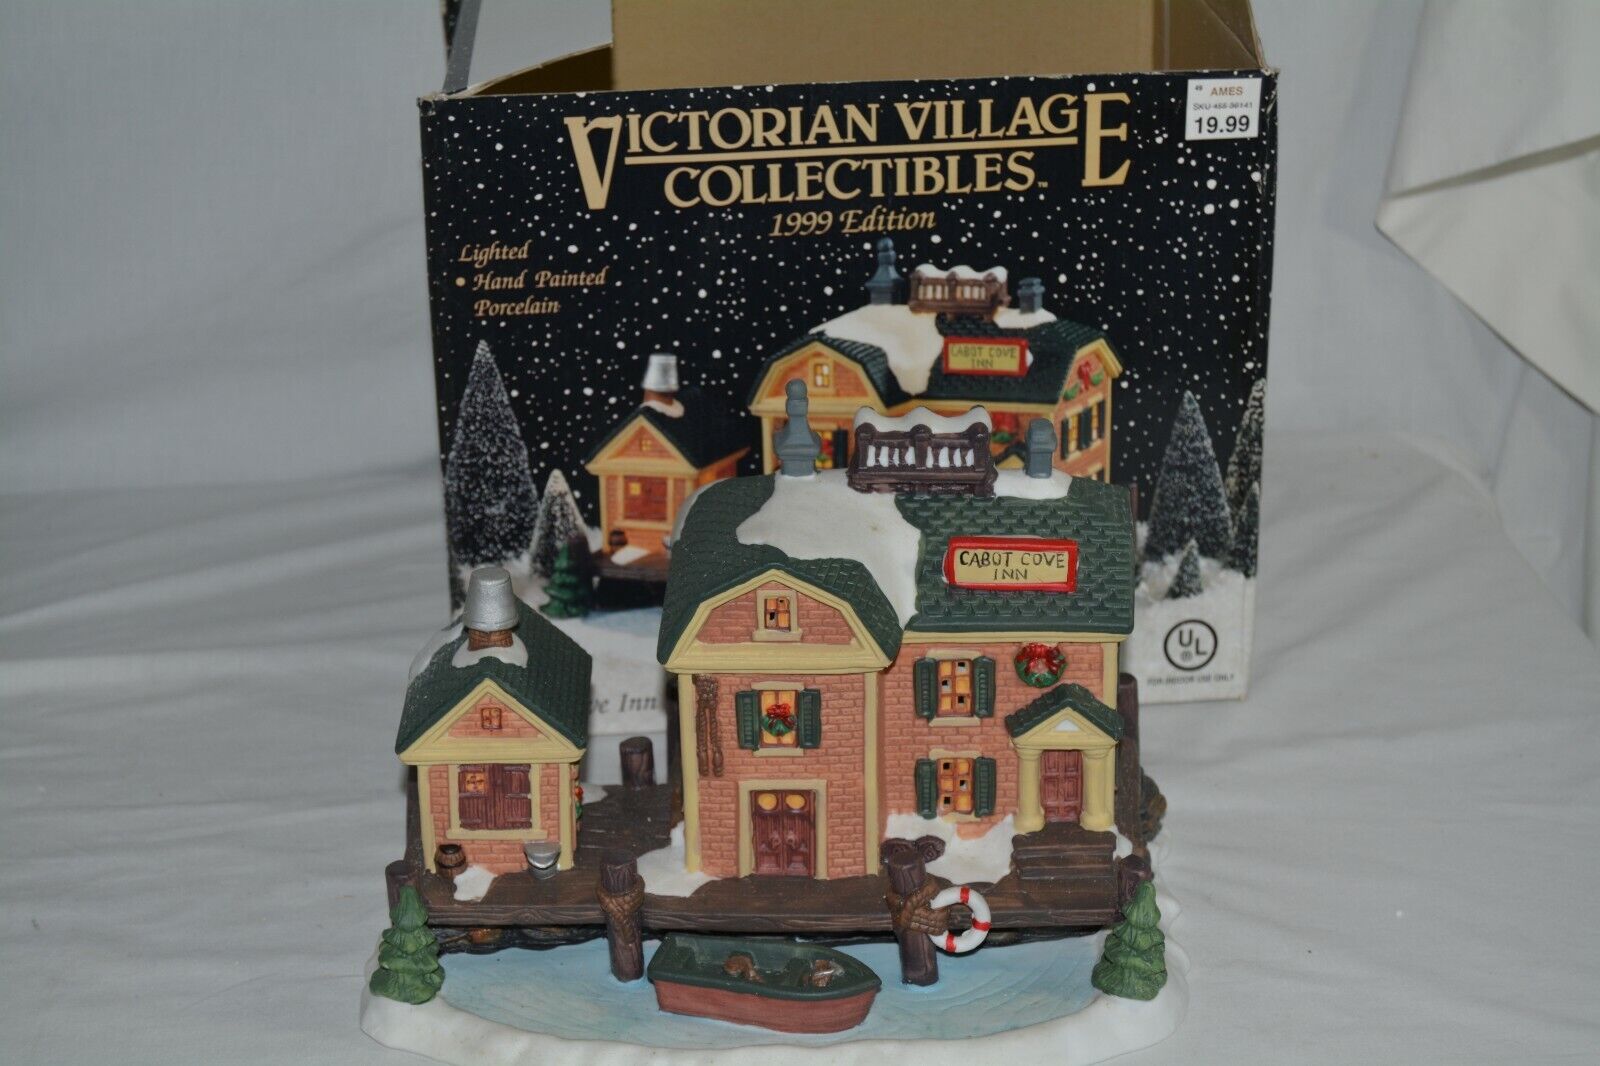 Vintage Victorian Village Collectible 1999 Edition Christmas Cabot Cove Inn